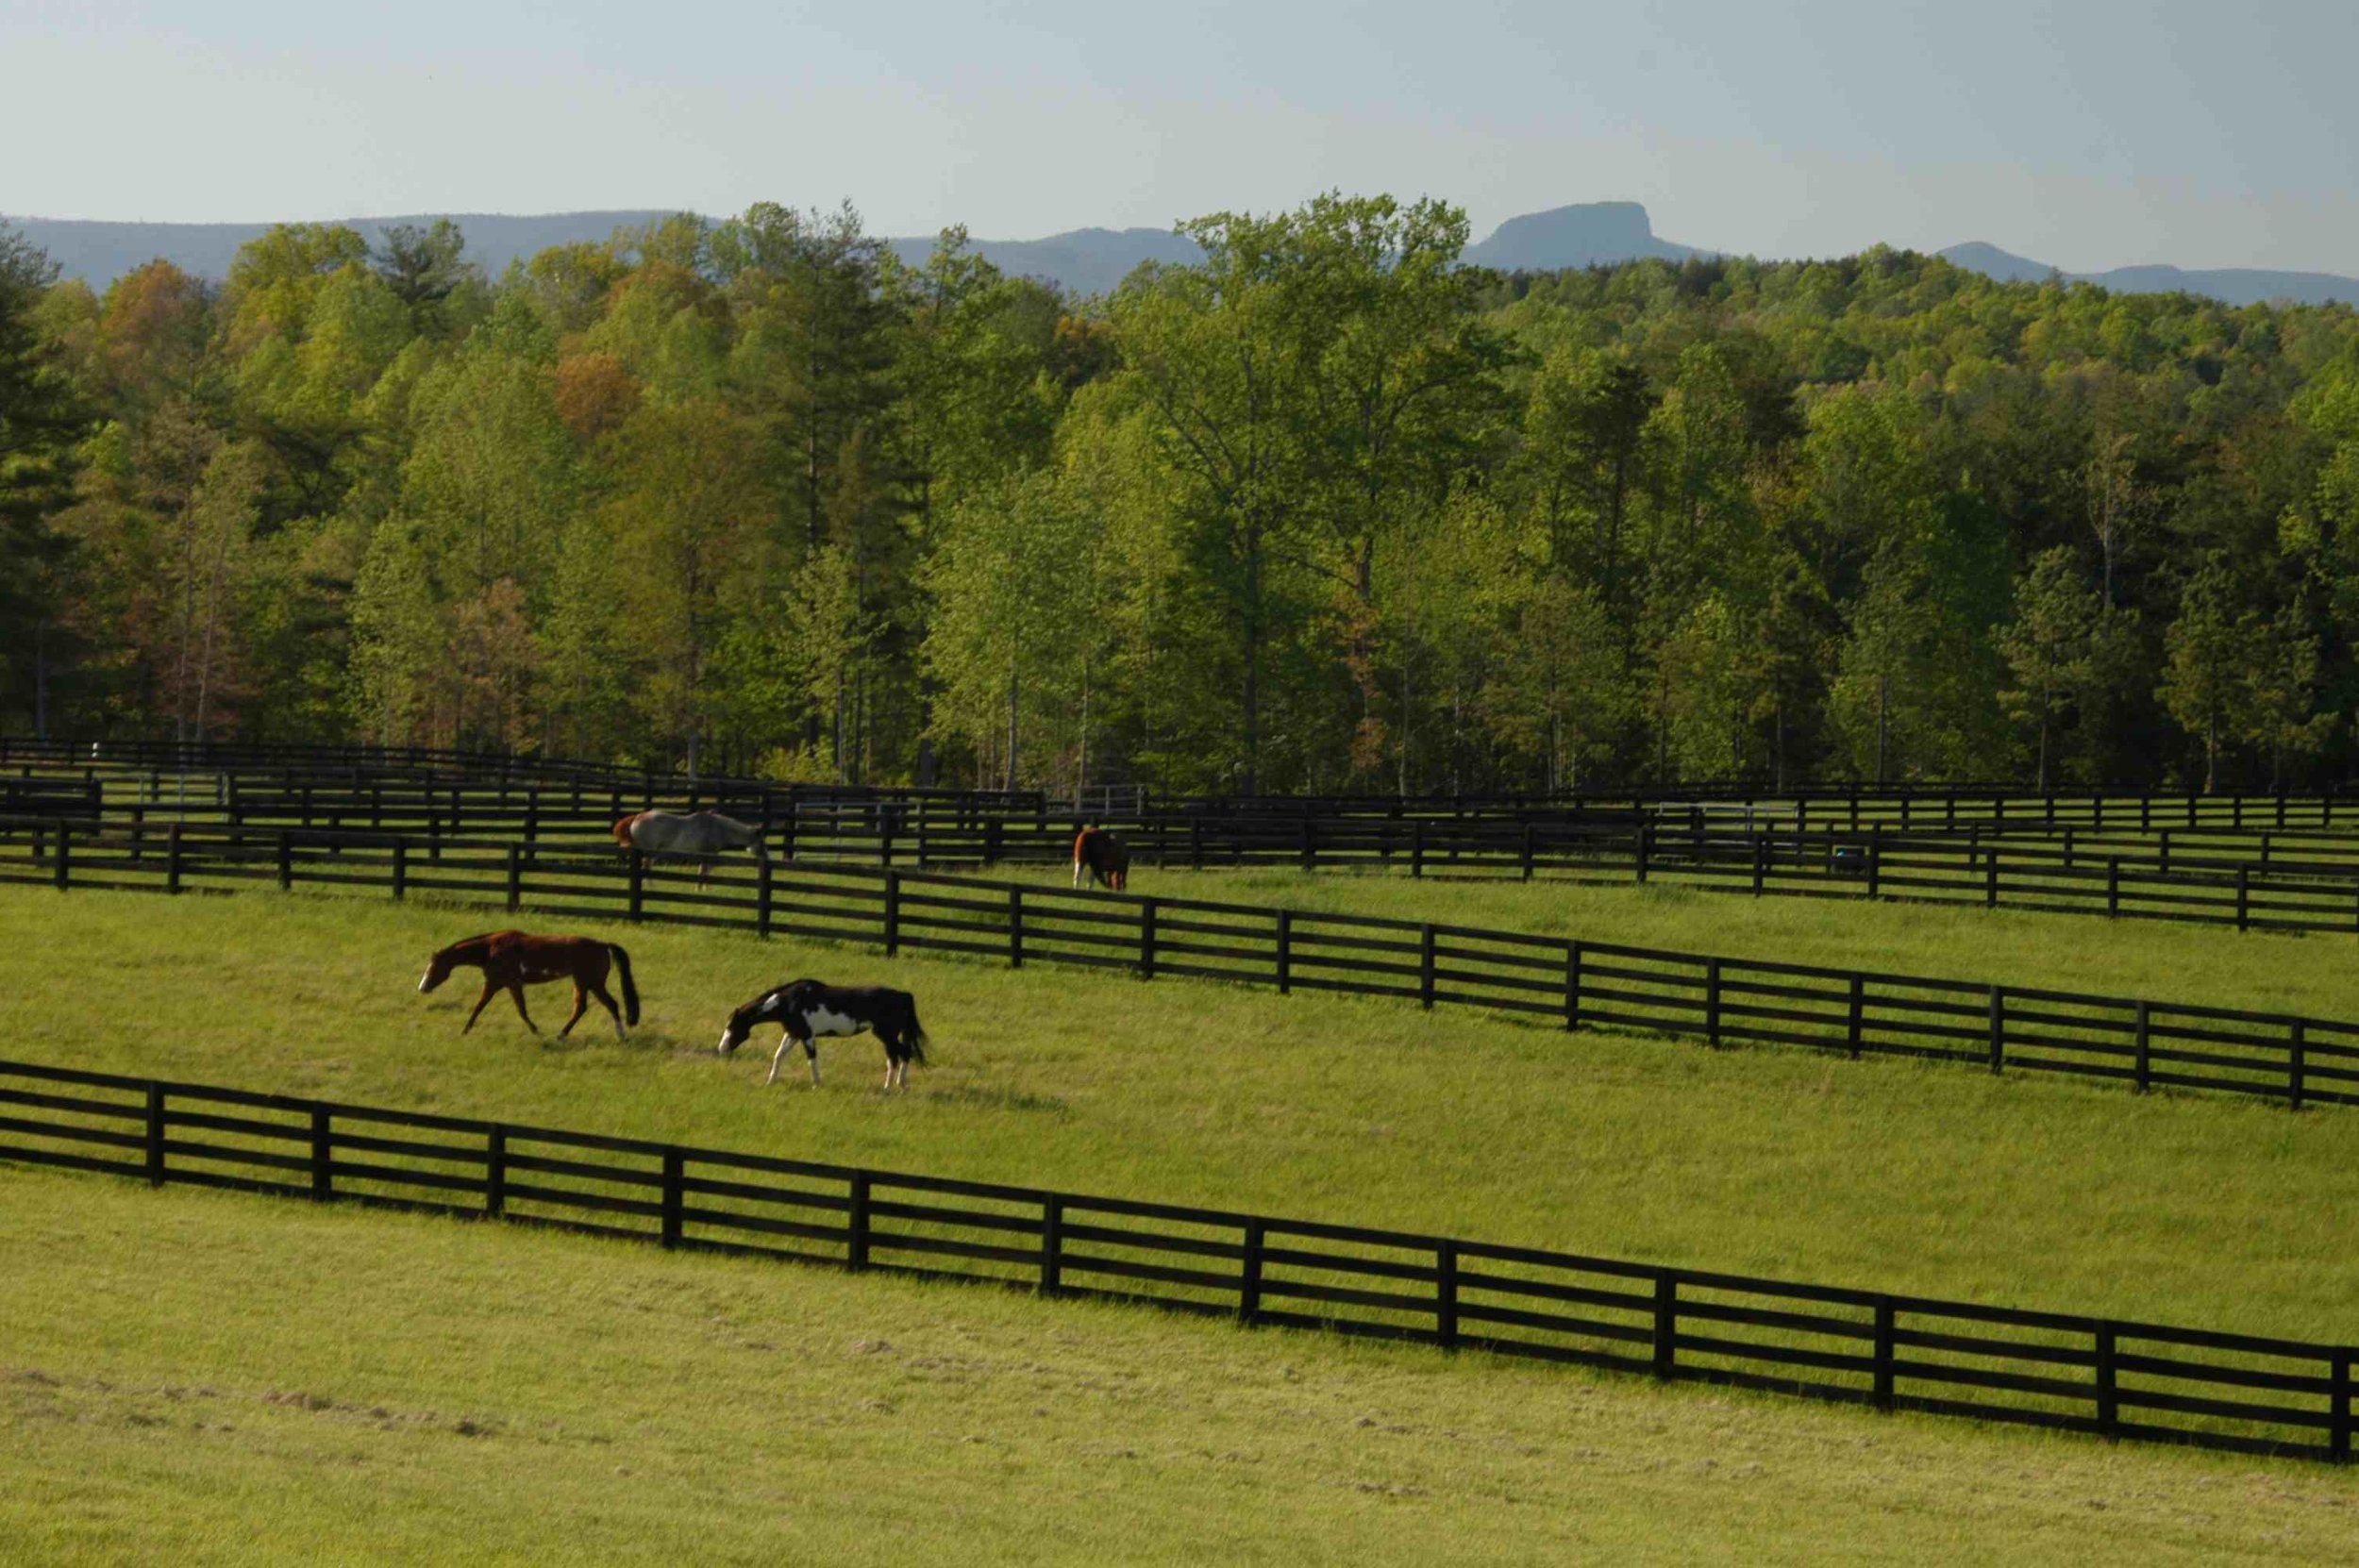  CRC residents enjoy daily views of horses grazing. 